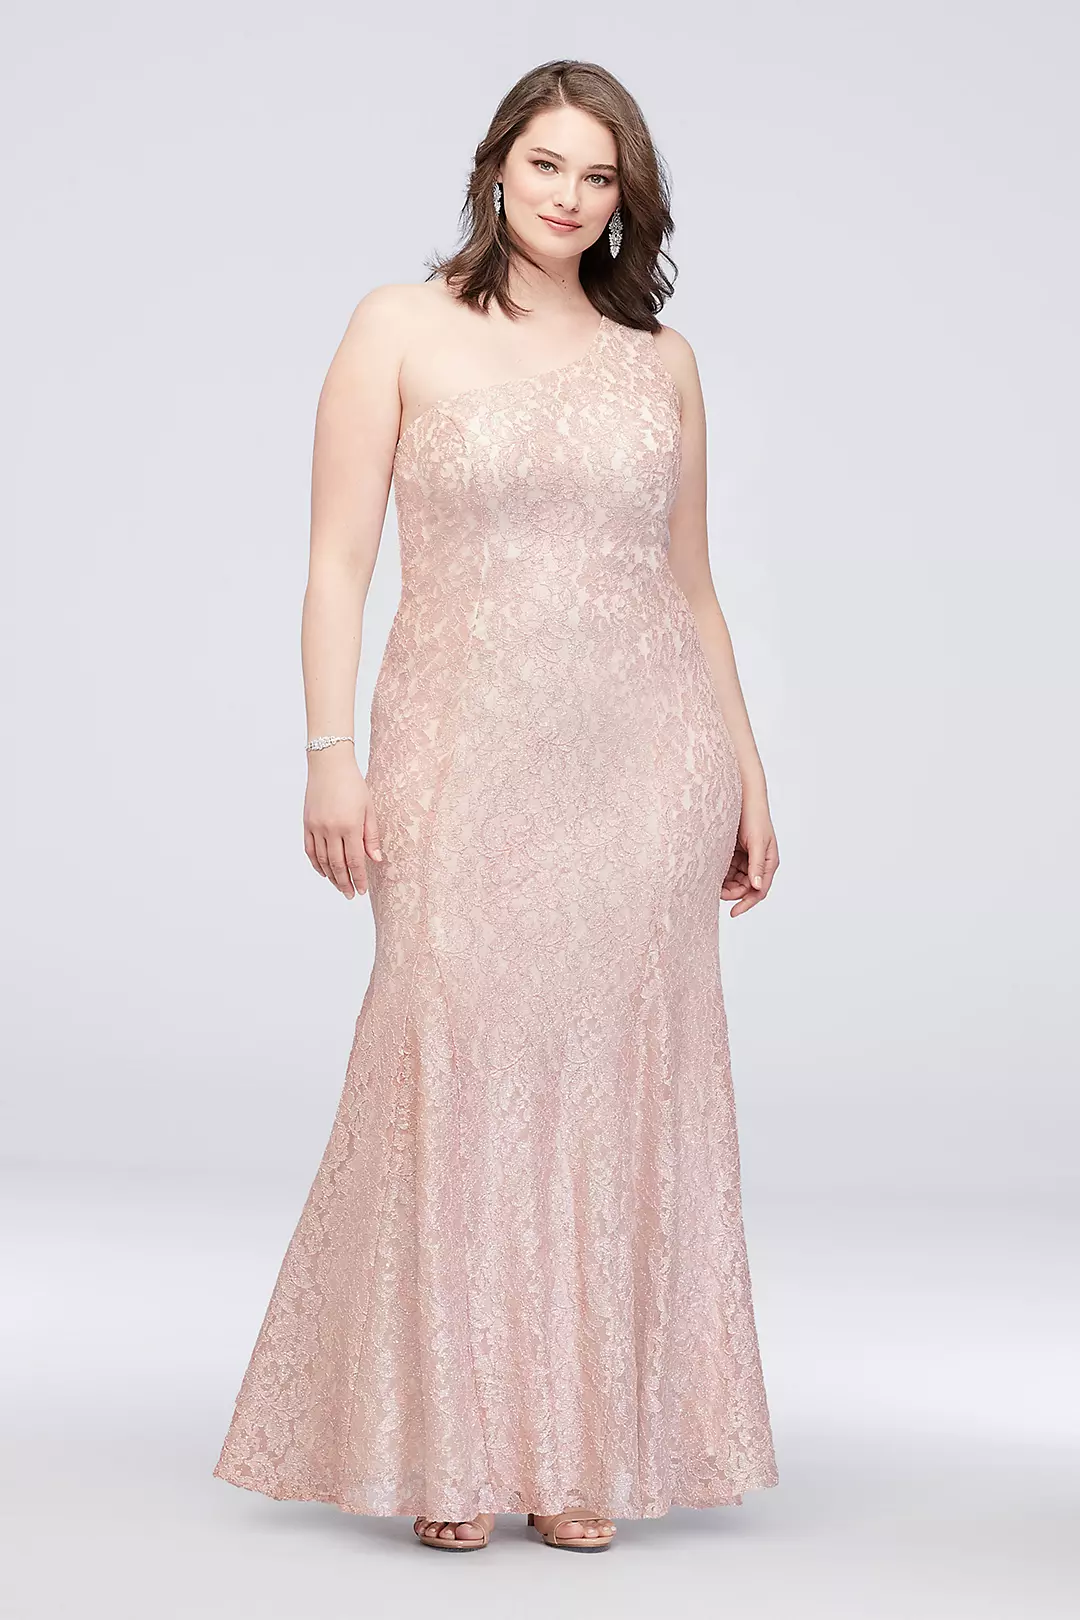 One-Shoulder Glitter Lace Mermaid Gown Image